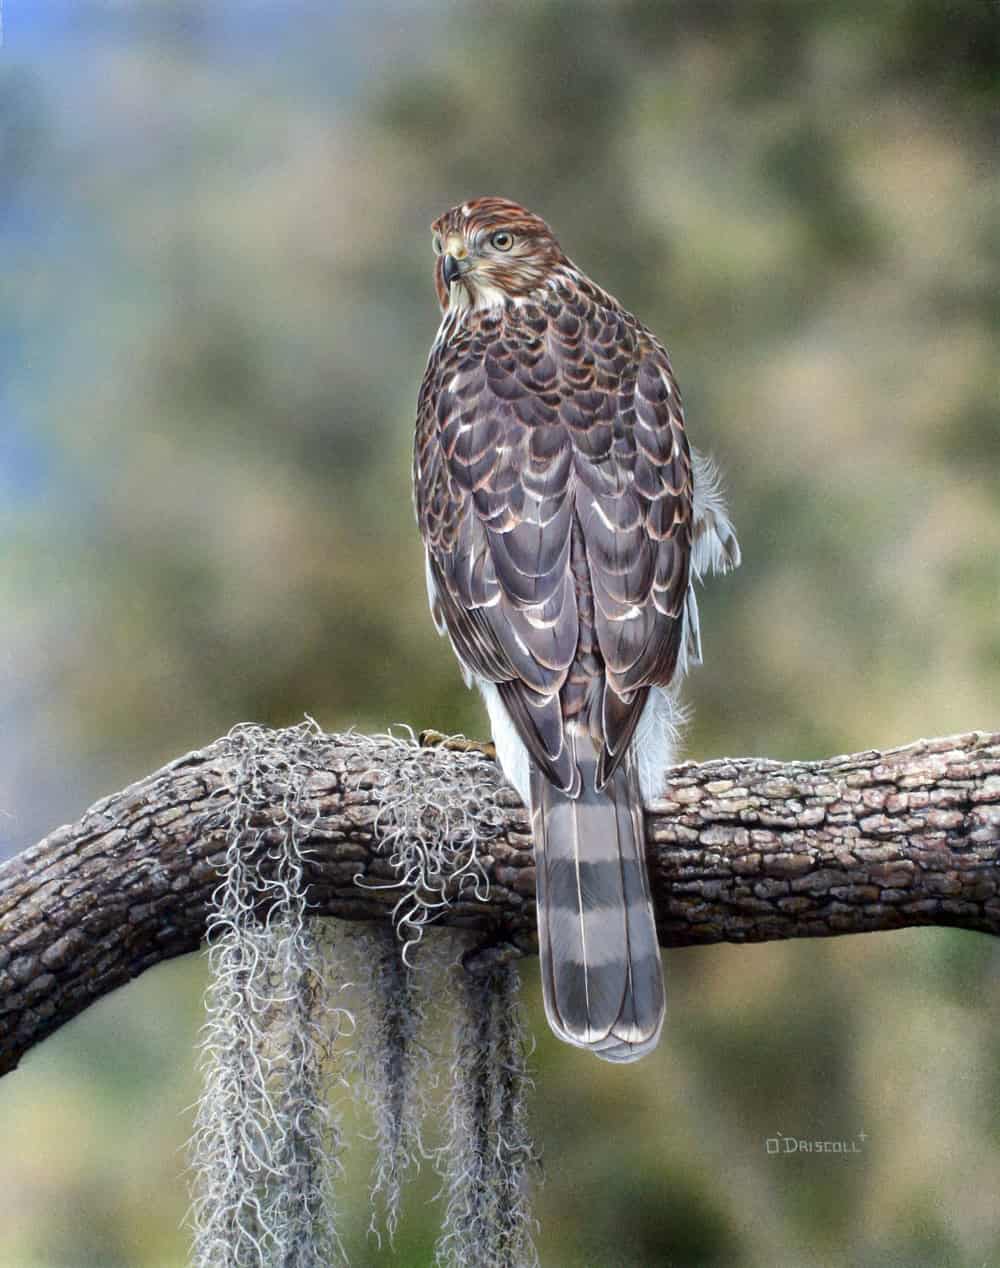 "Watchful Eye" Coopers Hawk [Photo courtesy of Danny O'Driscoll]